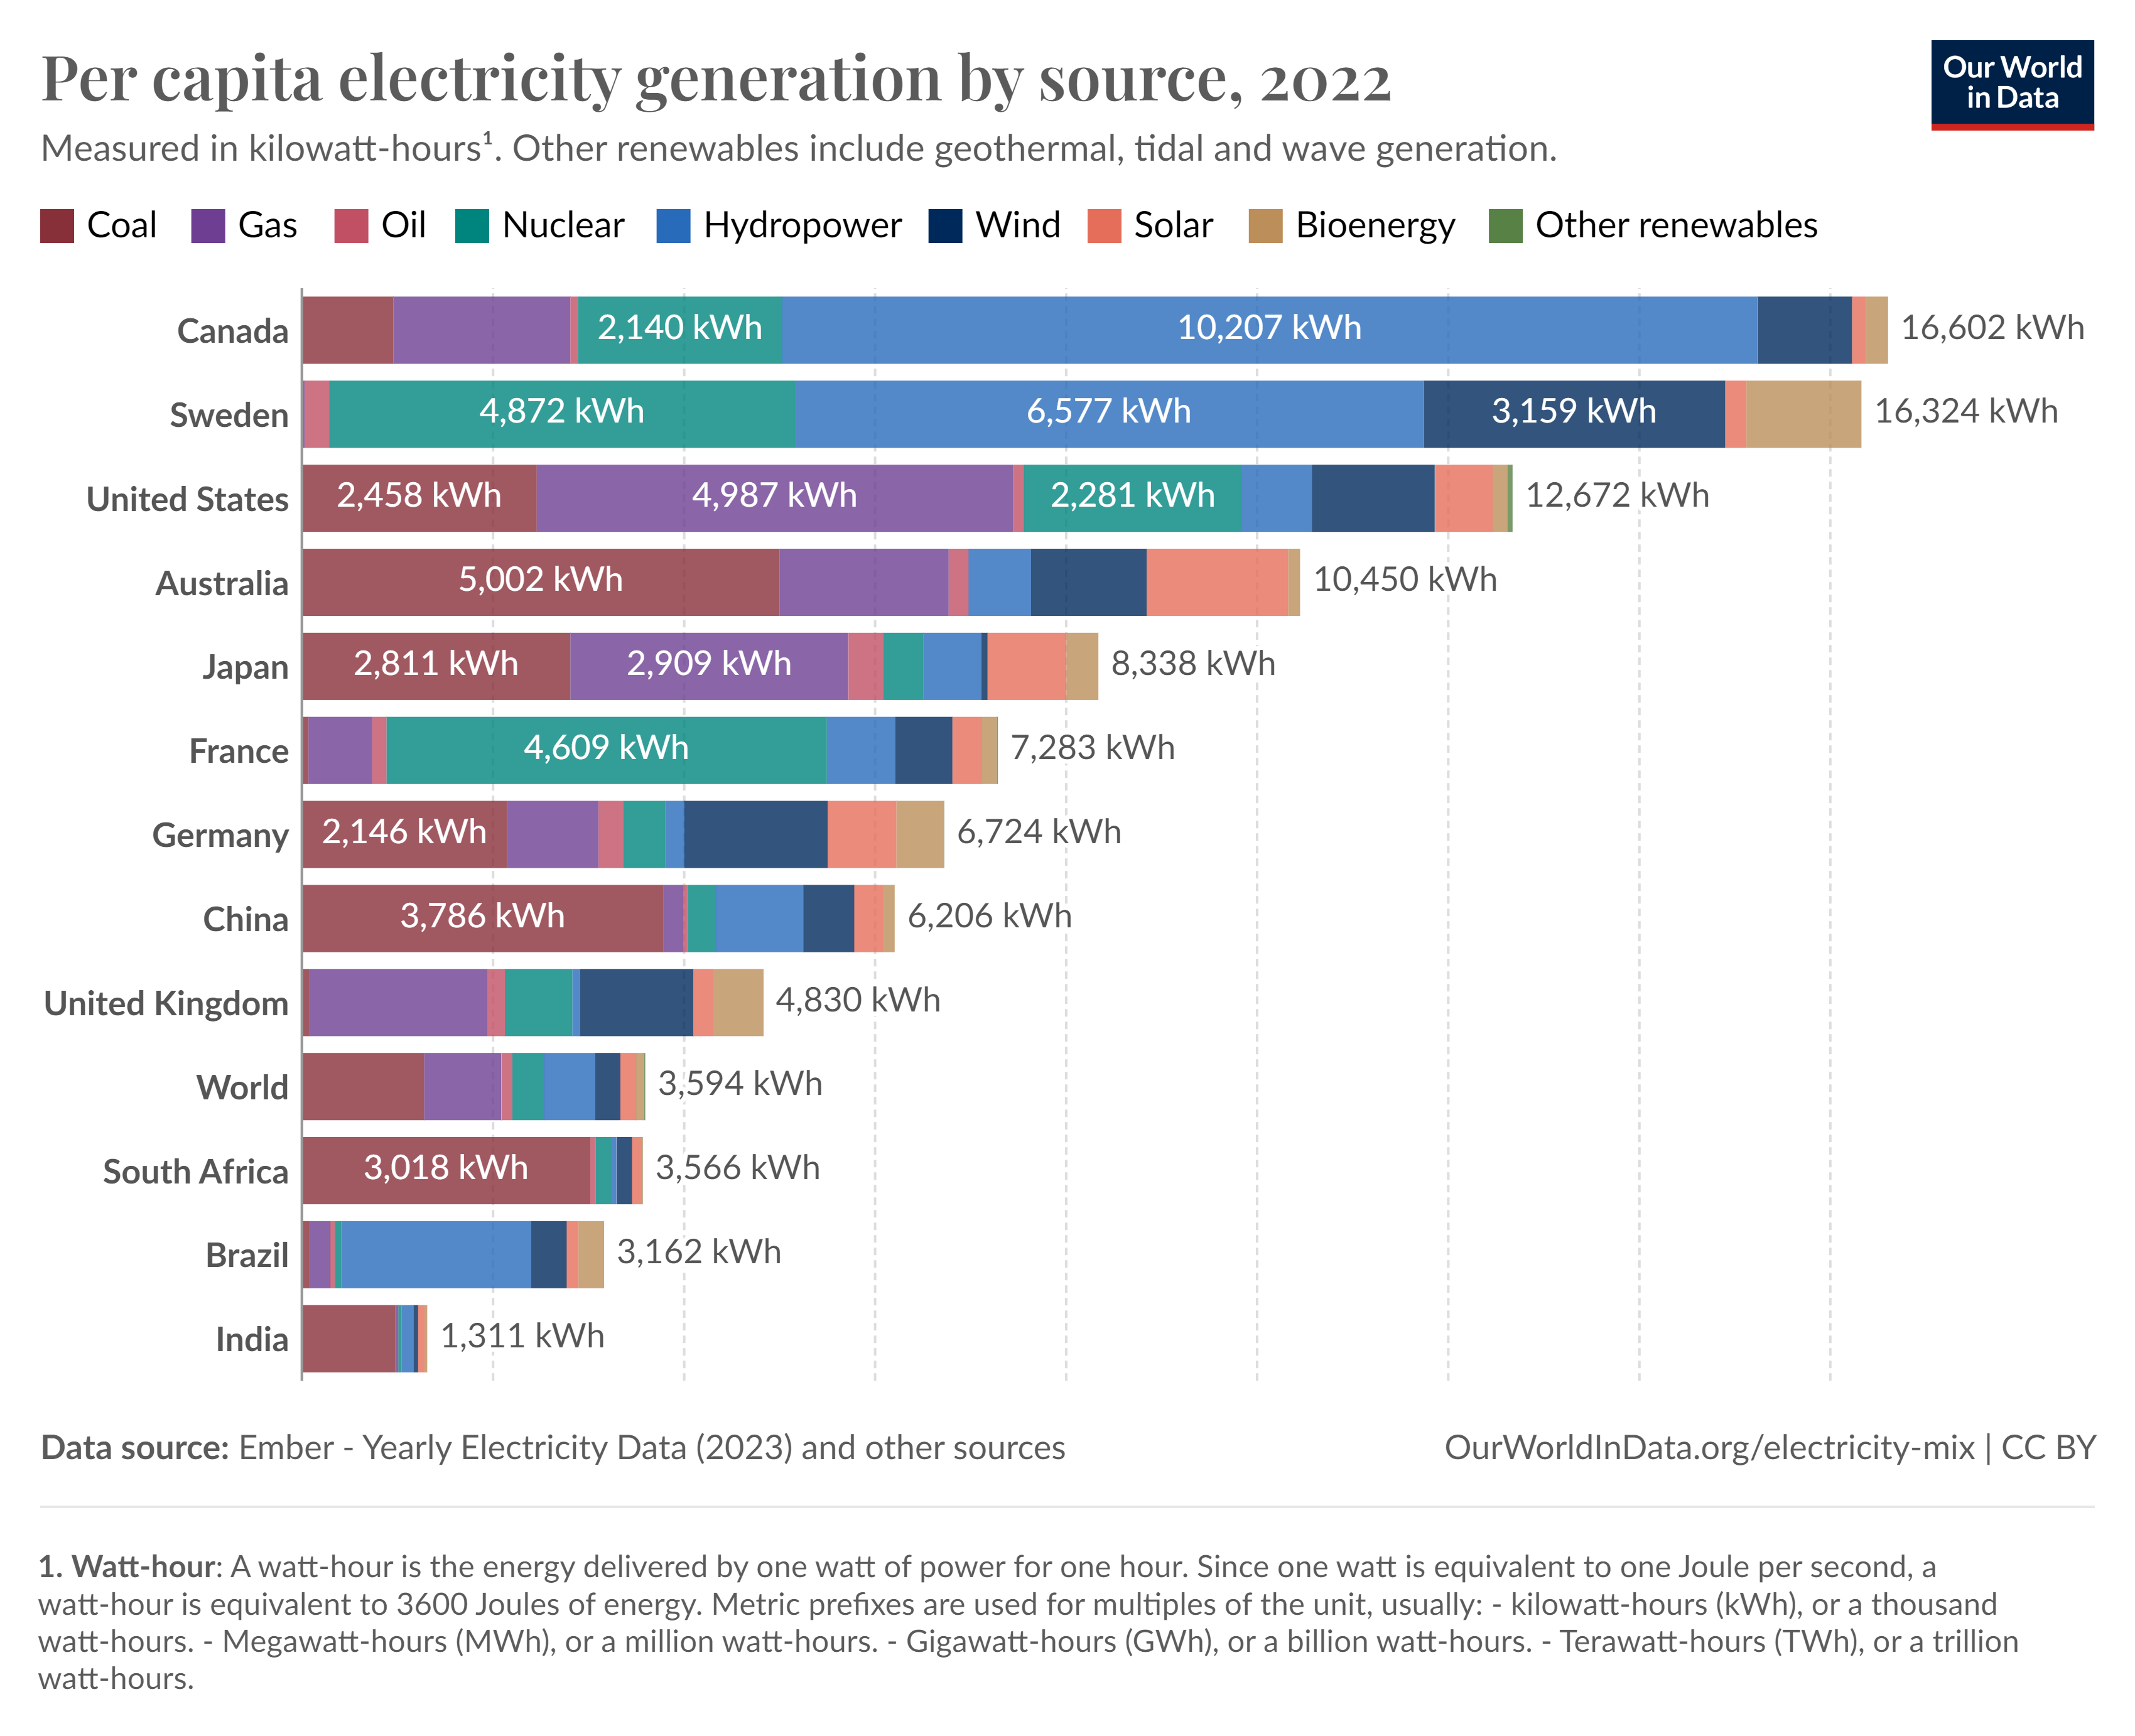 Per capita electricity generation by source, 2022 (source: Our World in Data)